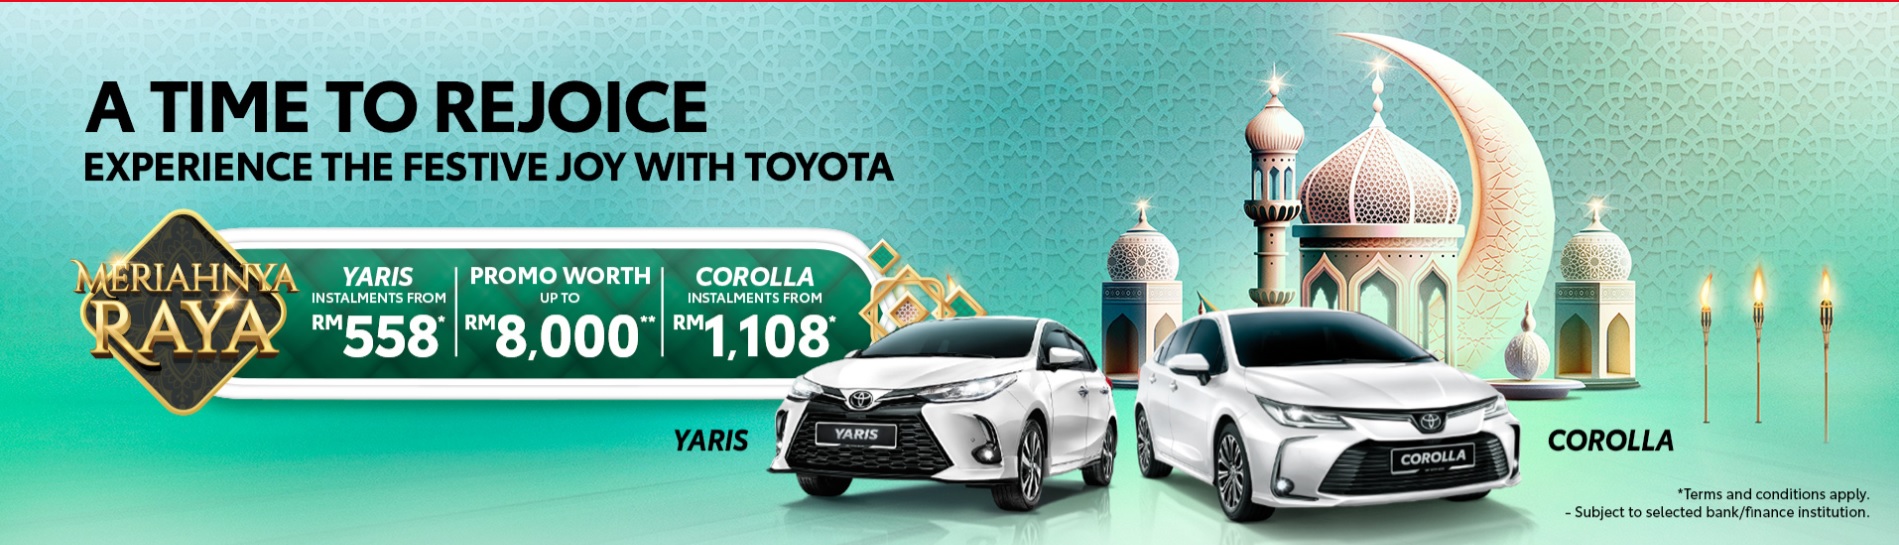 corporate social responsibility, lexus, malaysia, toyota, umw toyota motor, ramadan promotion from toyota with deals worth up to rm8,000